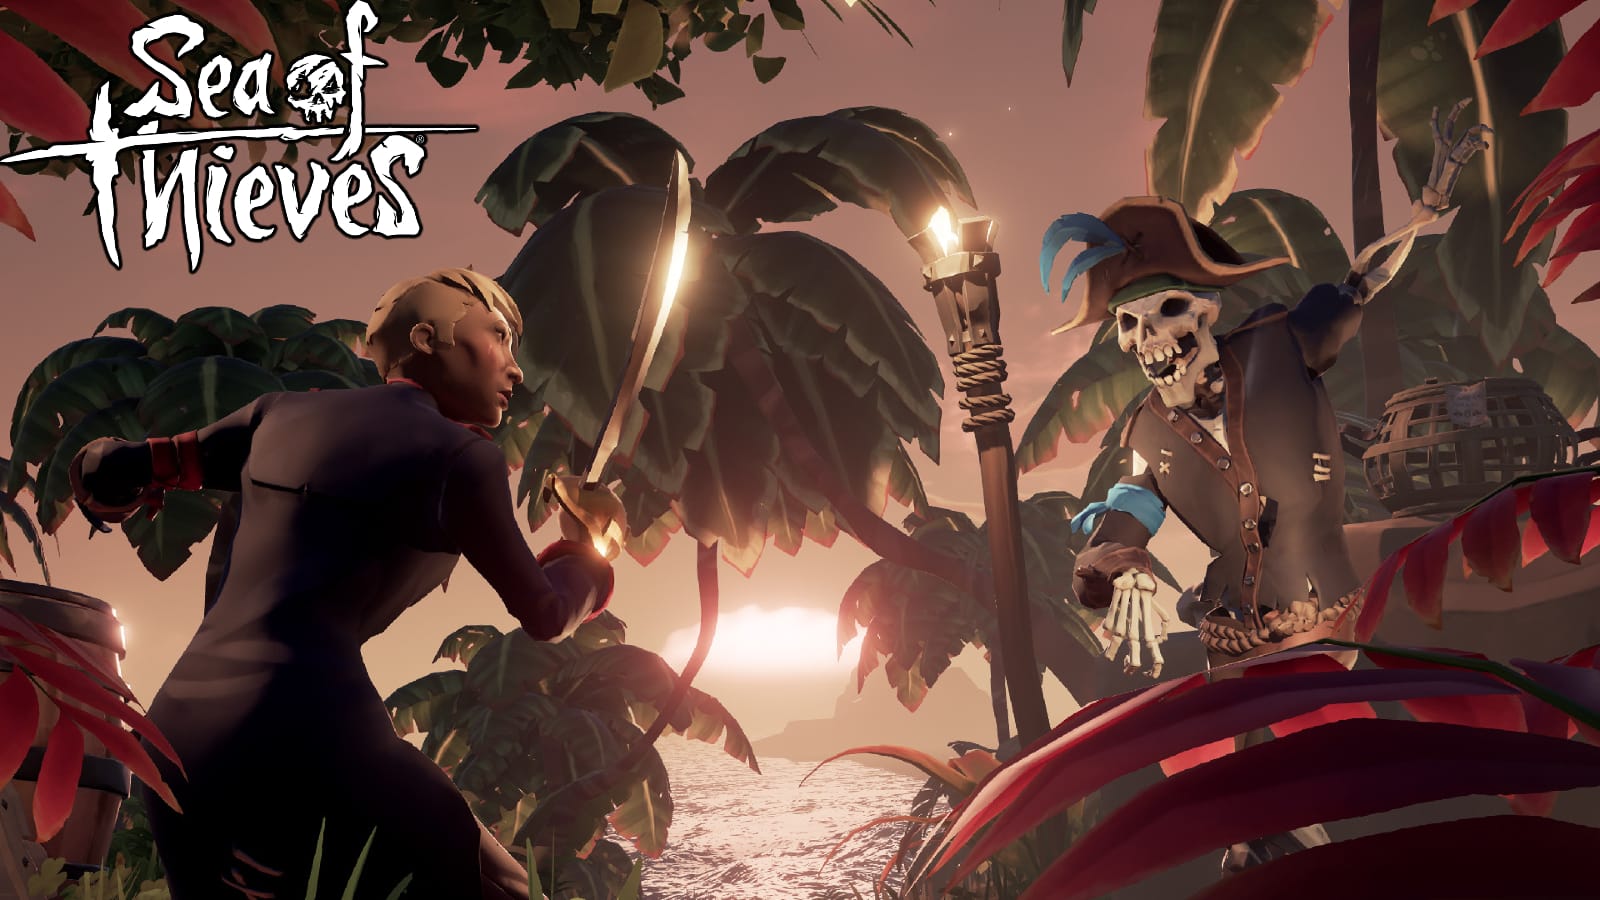 Sea of Thieves Server Status - Are The Servers Down February 10 2022 -  Fortnite Insider